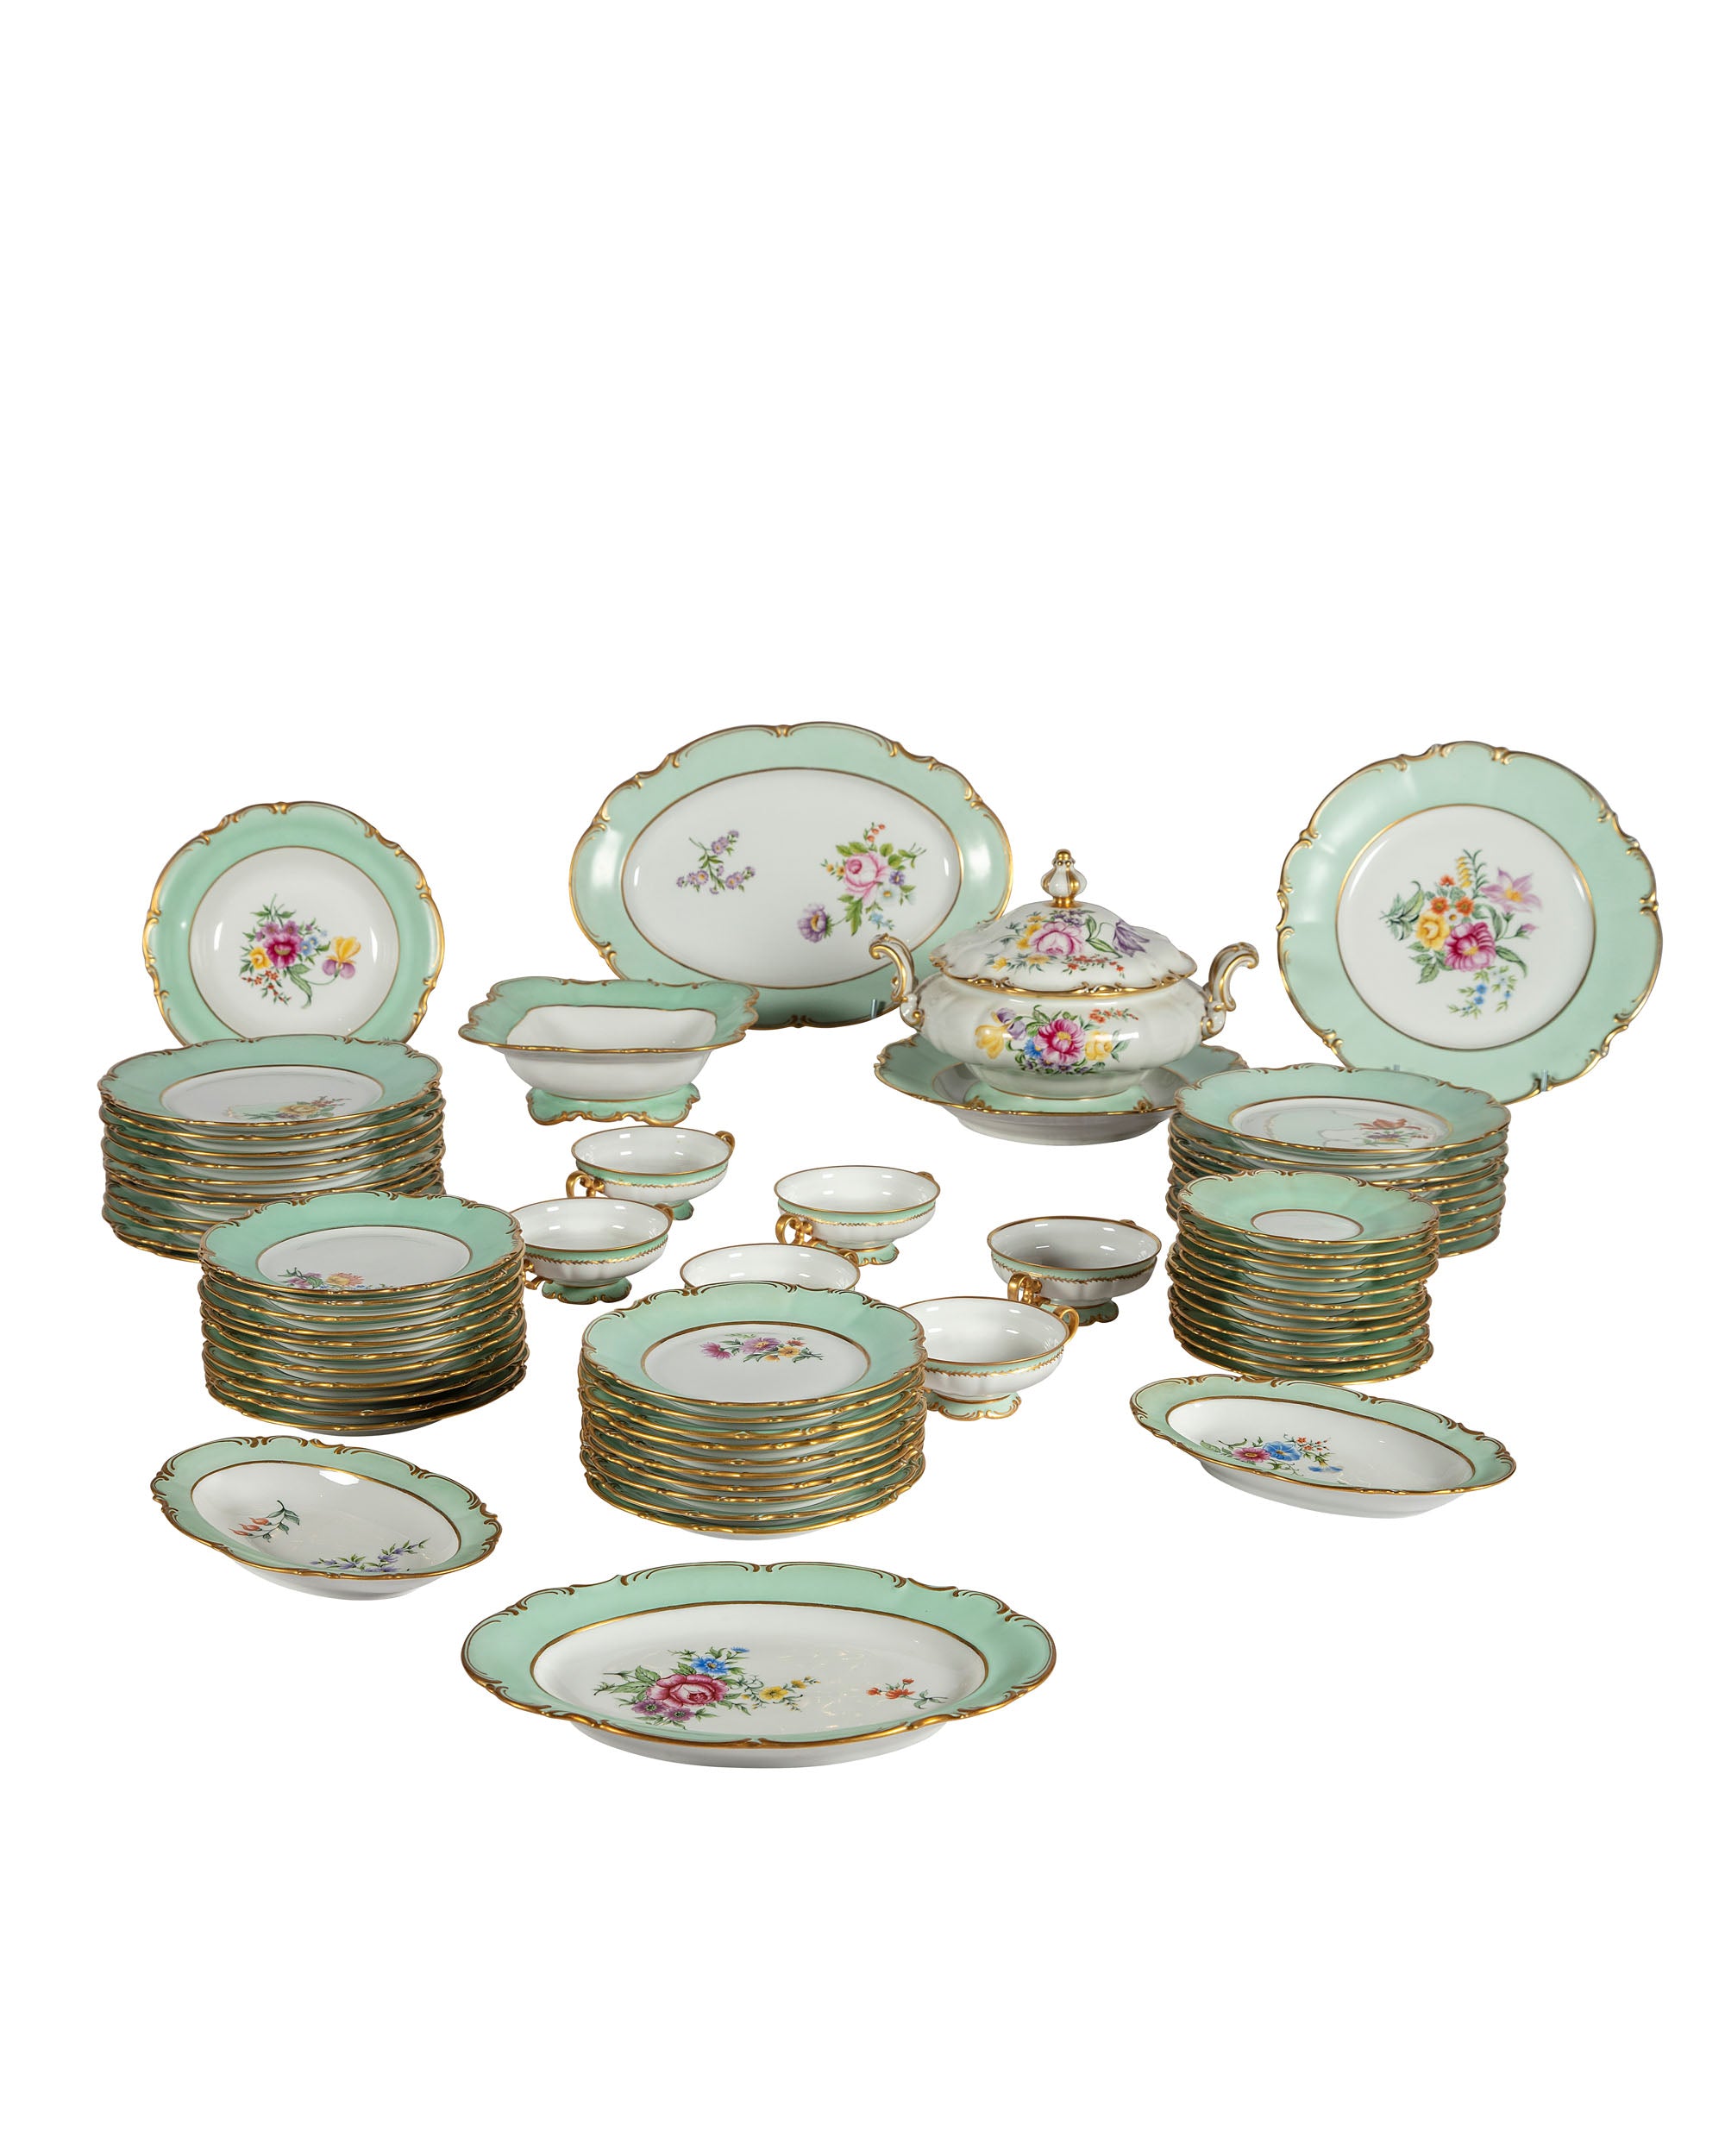 Porcelain tableware Hultschenreuther Selb, model Sylvia. Bavaria, Germany. 77 pieces